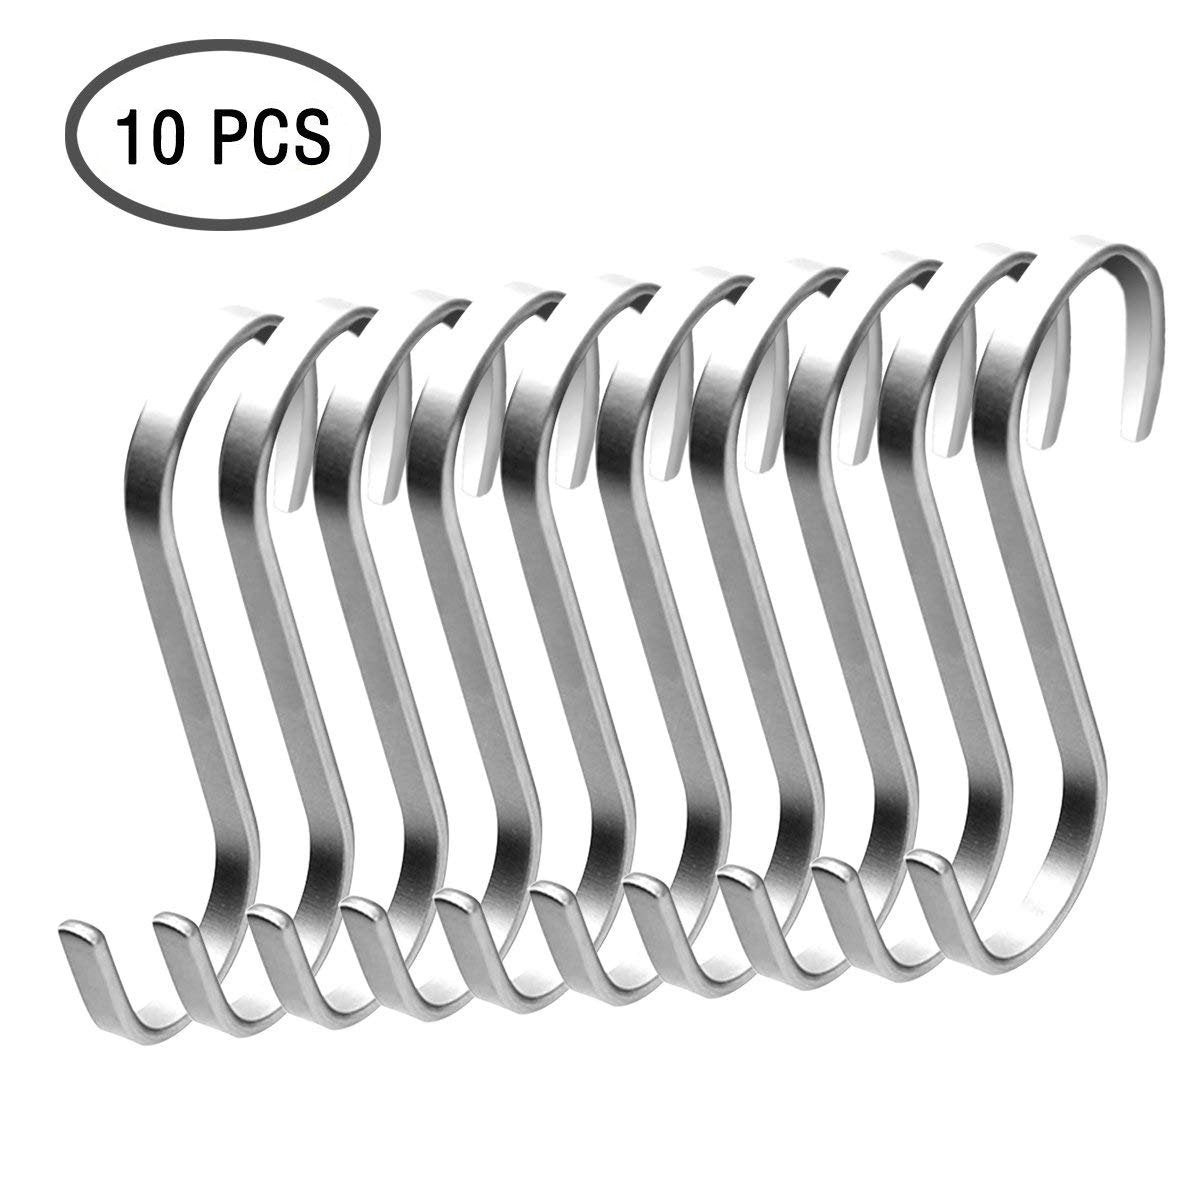 Premium Stainless Steel Metal S Hooks Kitchen Pot Pan Hanger Clothes Storage Rack Polished 10 Pcs/Pack 3.3 Inches Flat by Freehawk